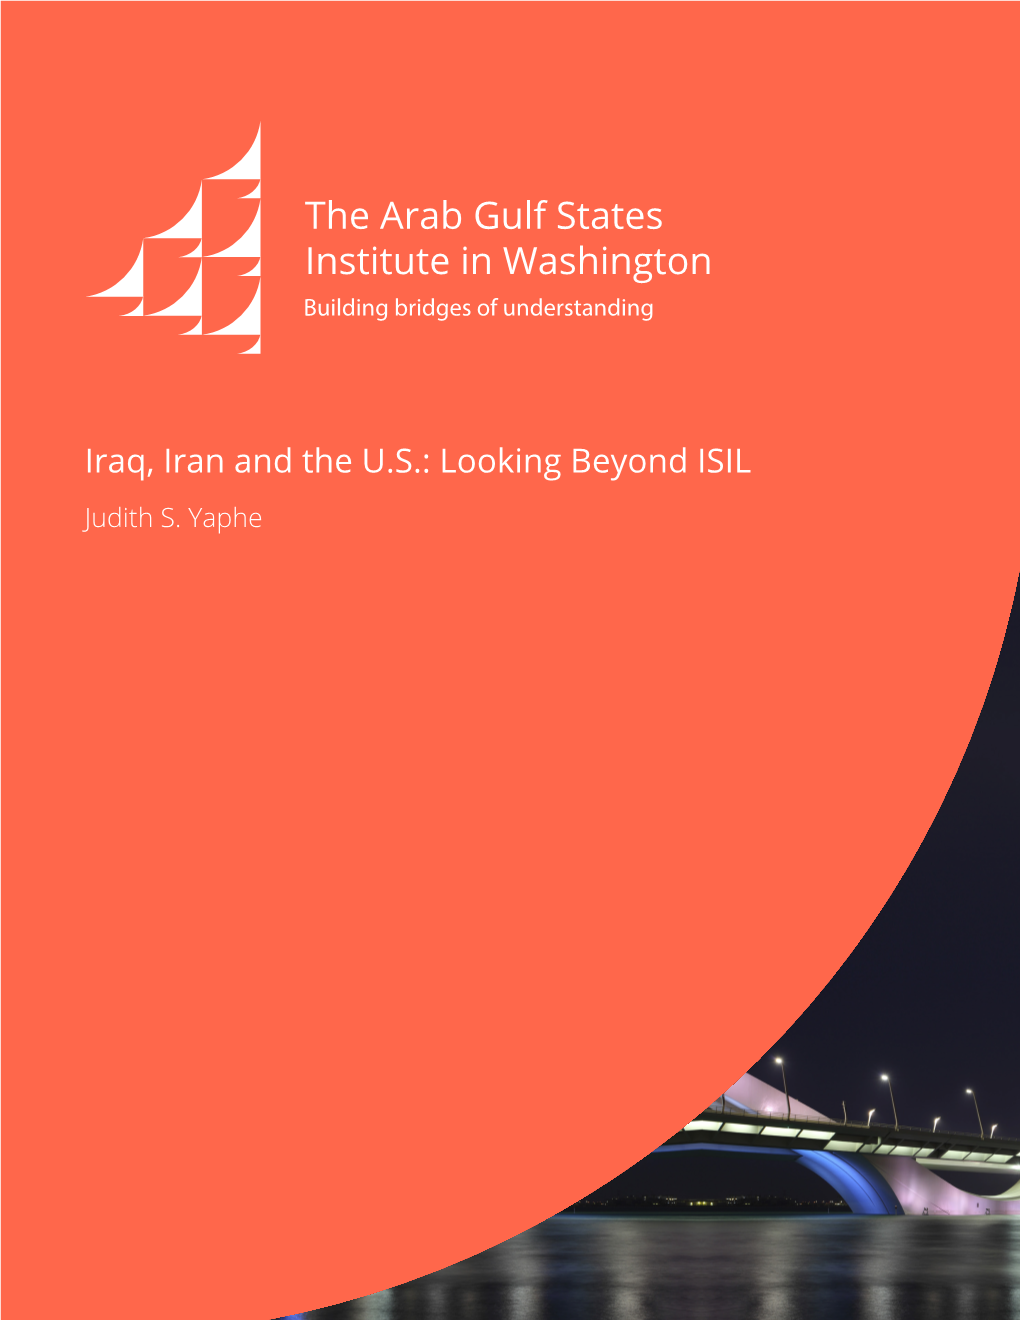 Iraq, Iran and the US: Looking Beyond ISIL